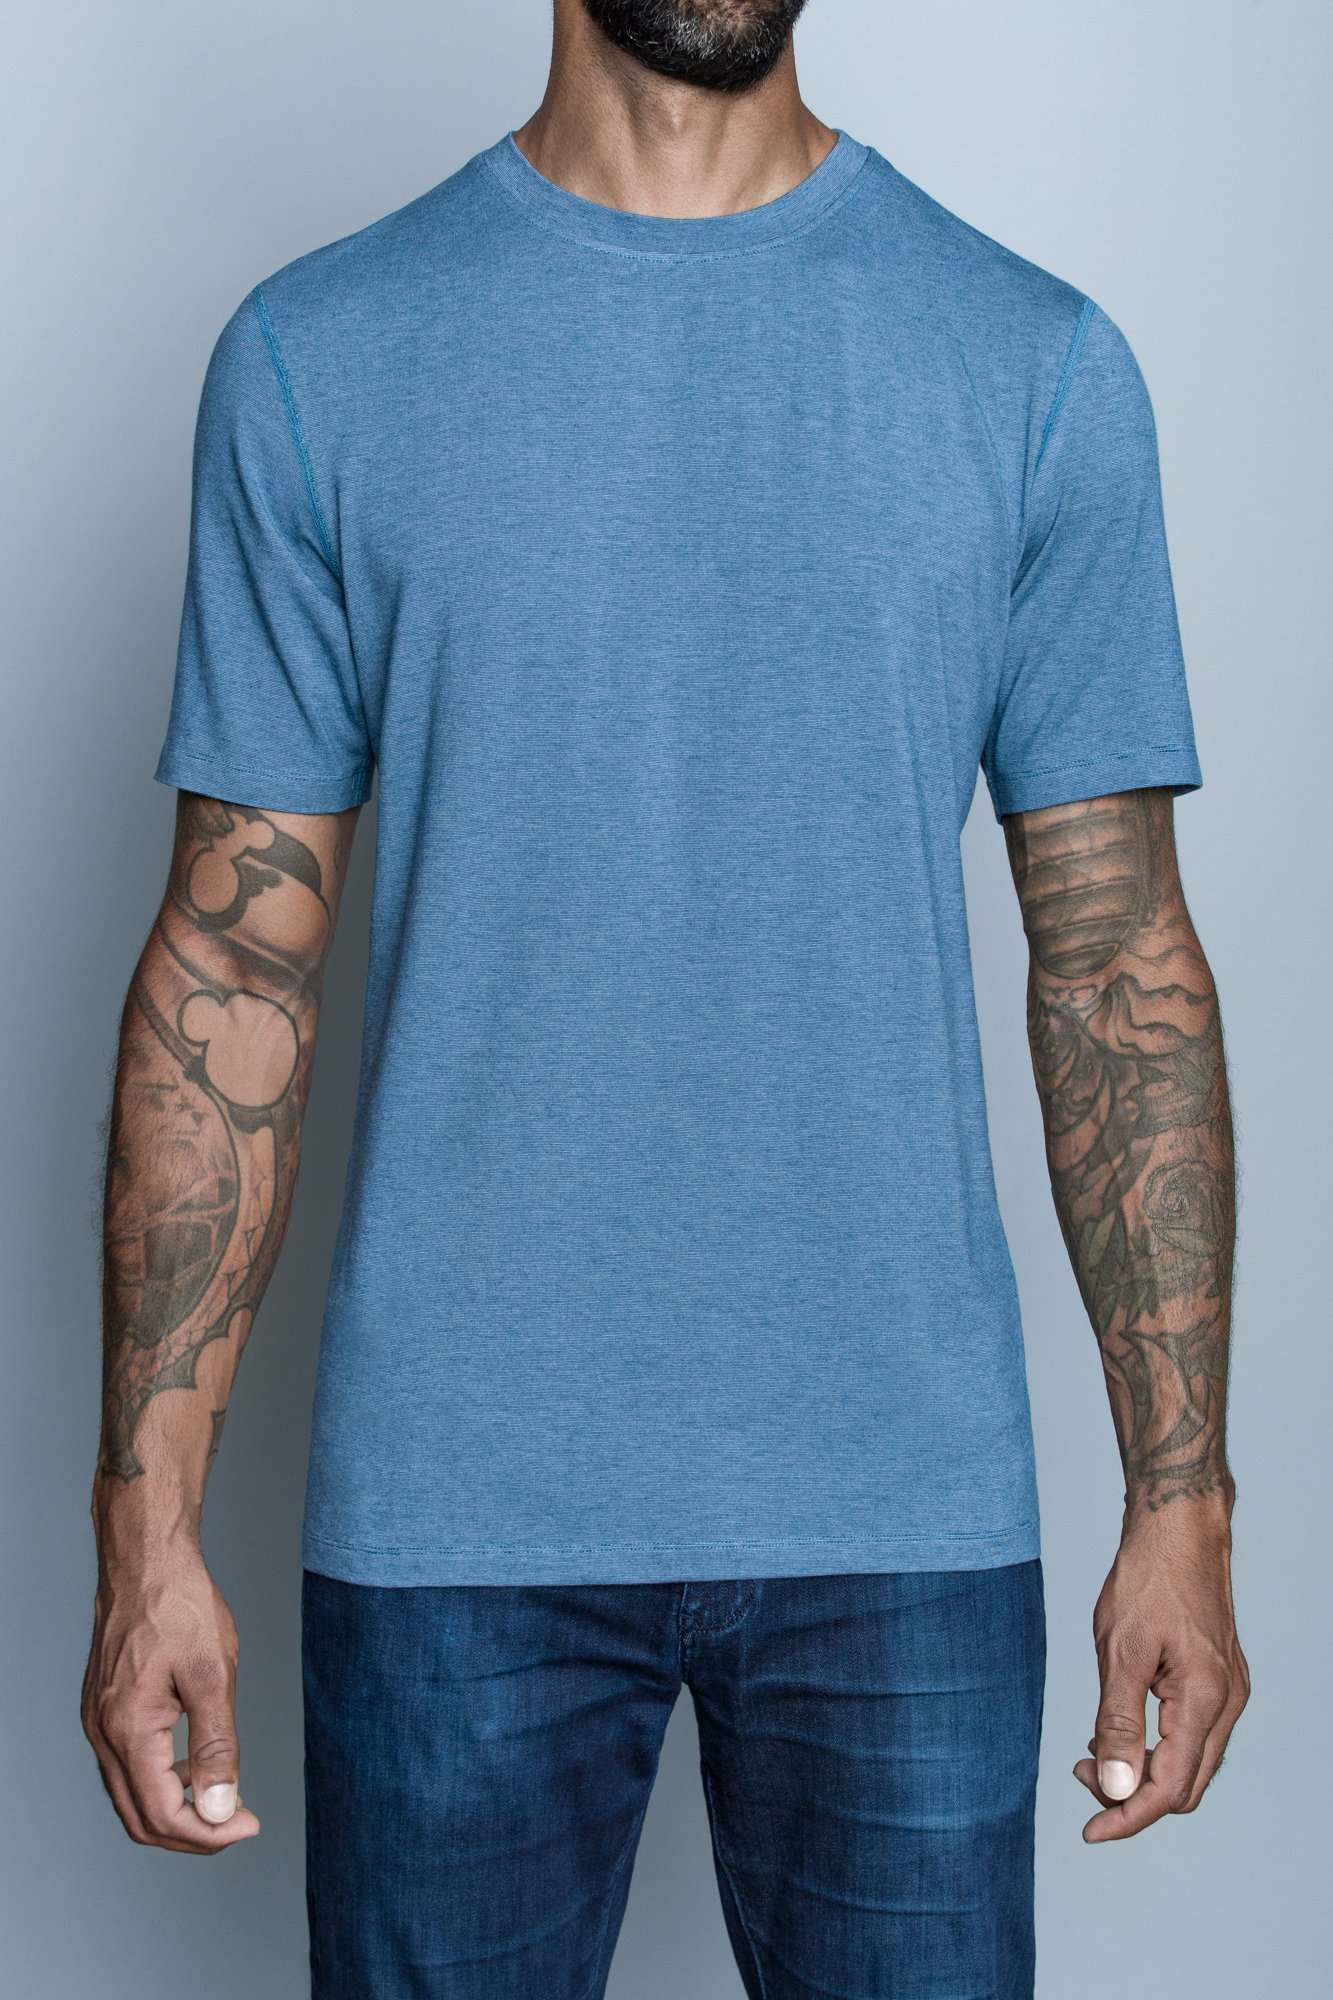 Navas Lab Crowe microstripe tall tee in light blue. Long T-shirt for tall guys for everyday use.